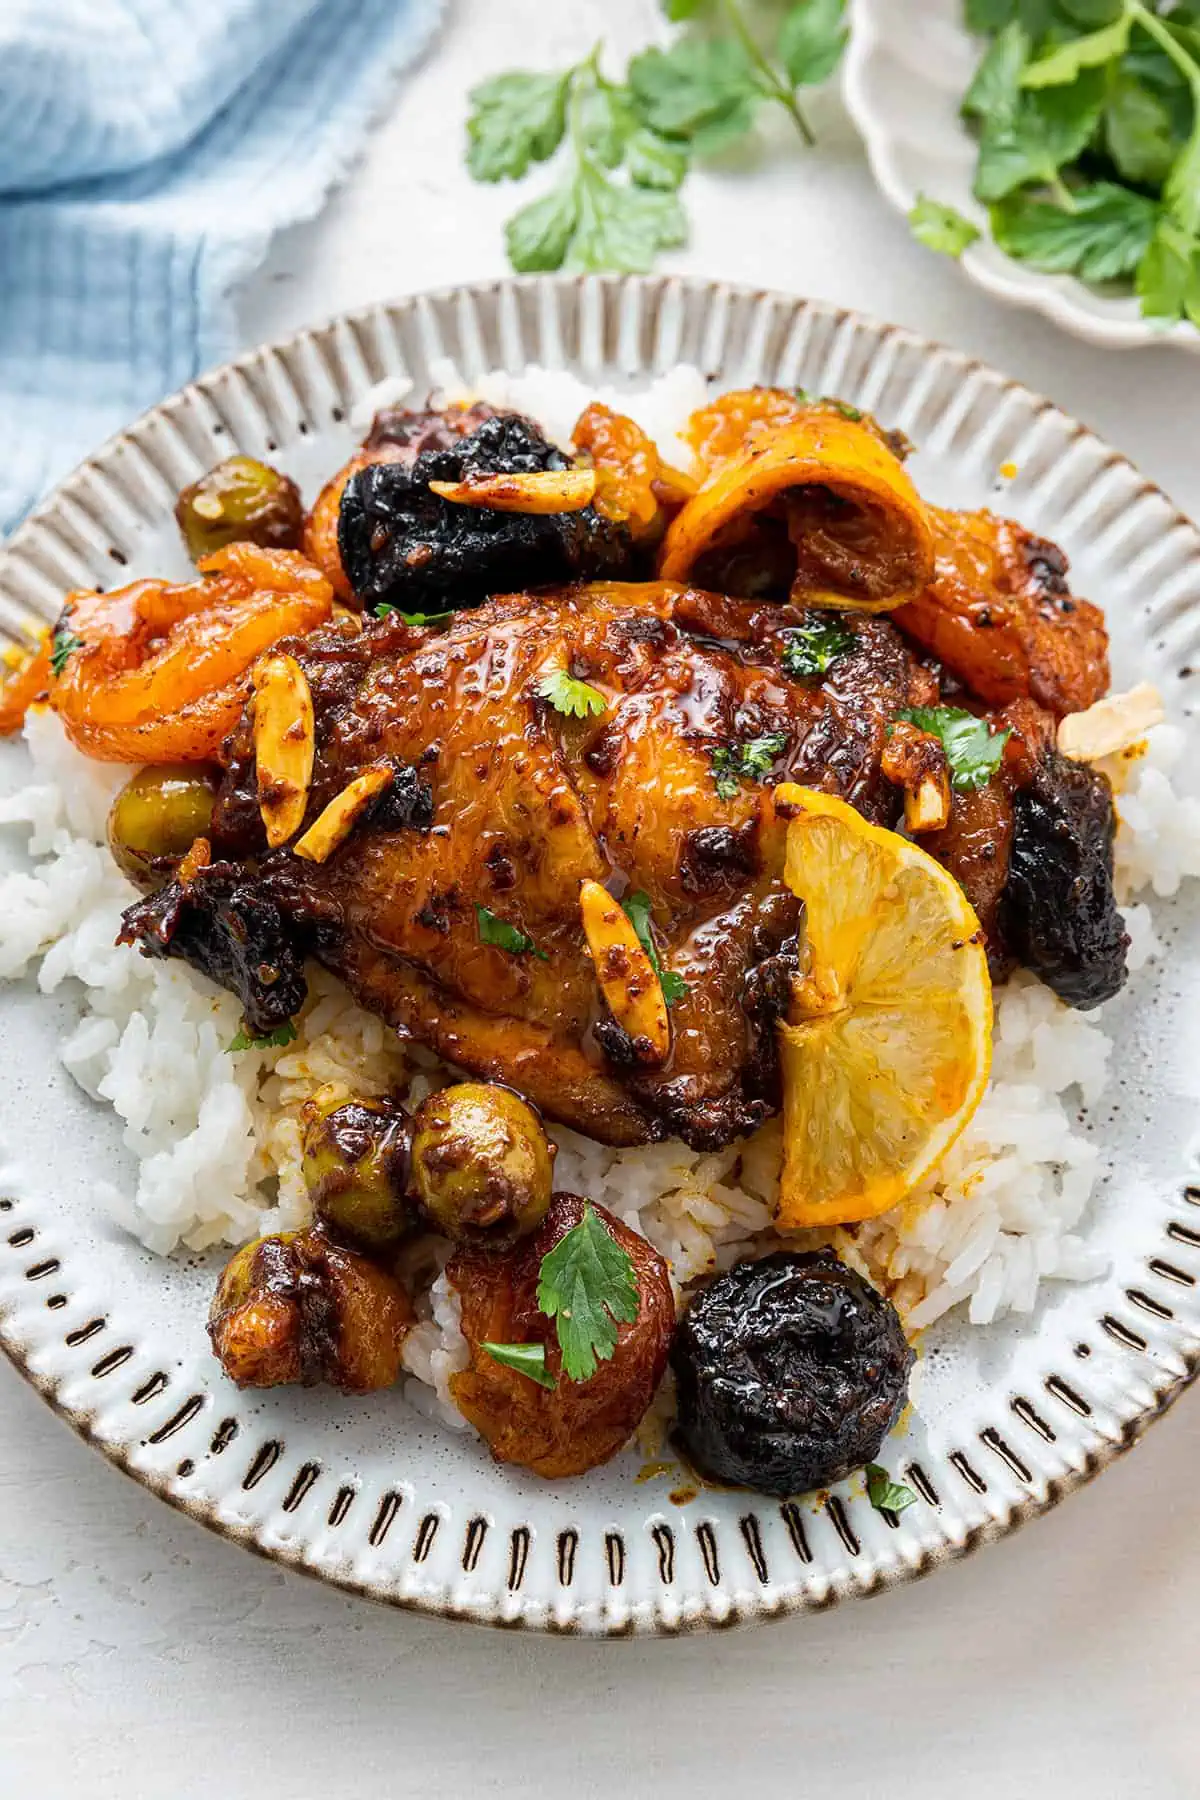 Overhead view of a plate with a chicken thigh on top of rice, covered with lemon slices, slivered almonds, prunes, olives, and dried apricots